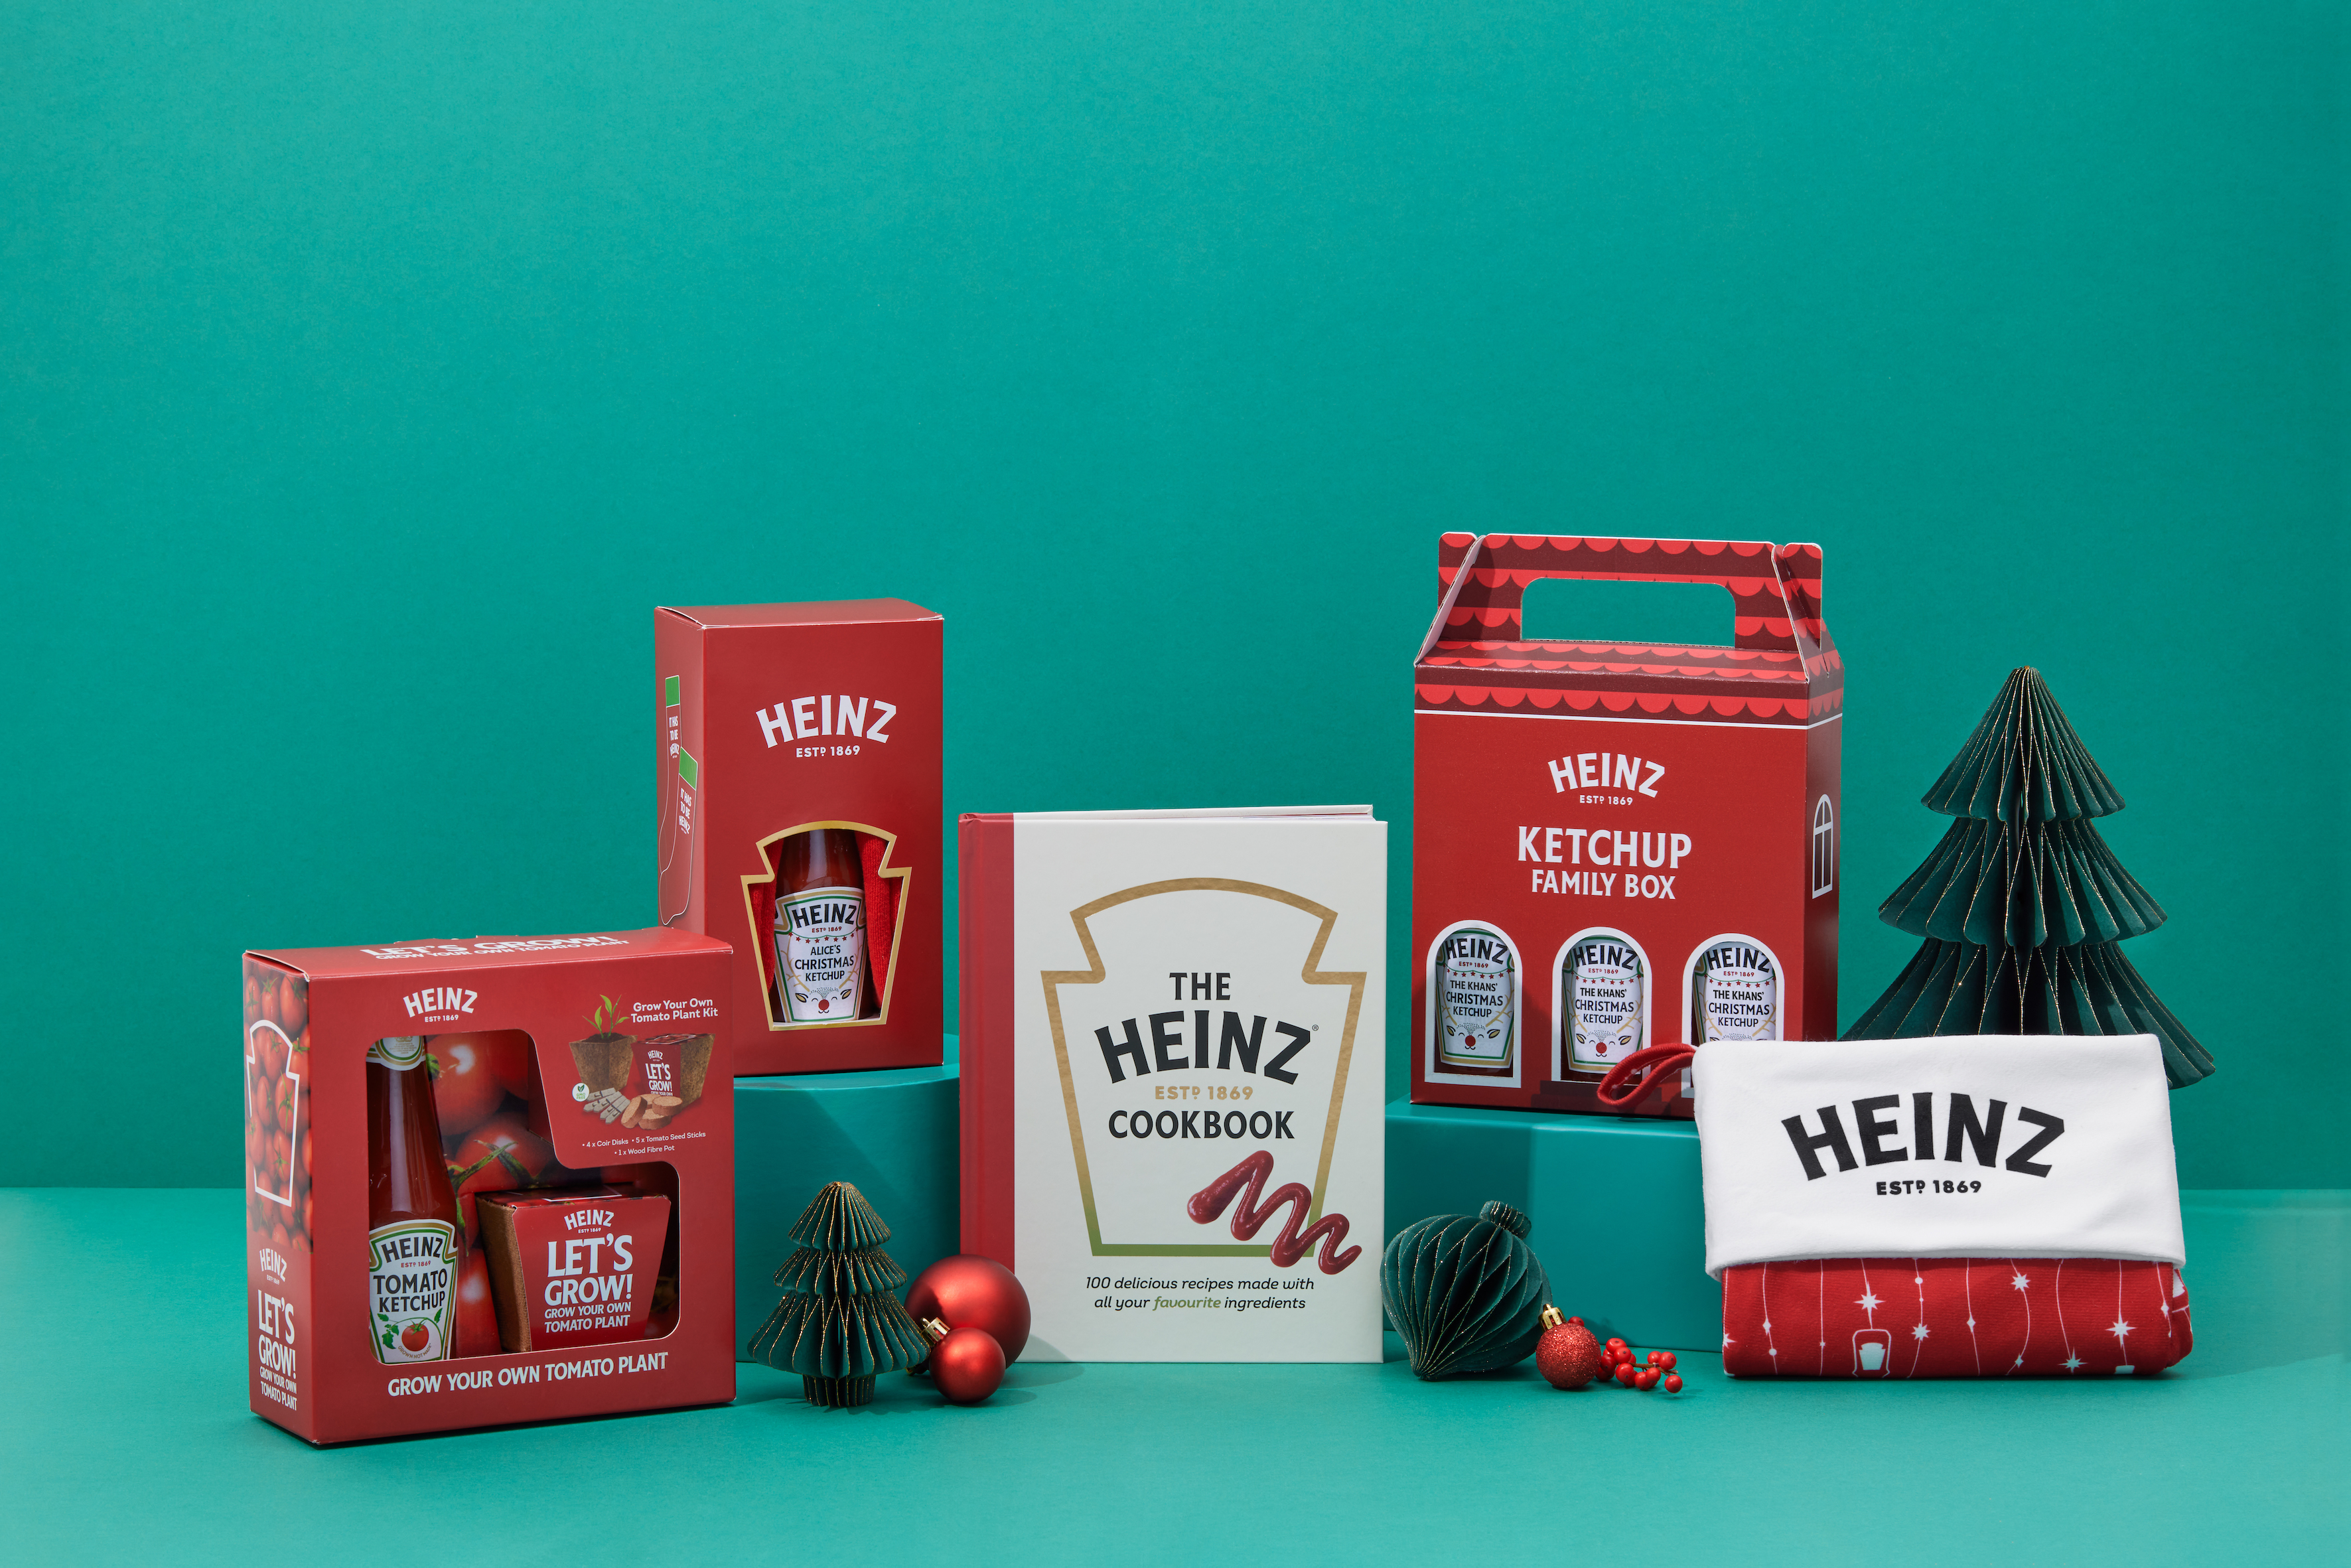 Heinz launches stocking filler gifts for Christmas – including a cookbook and ketchup socks